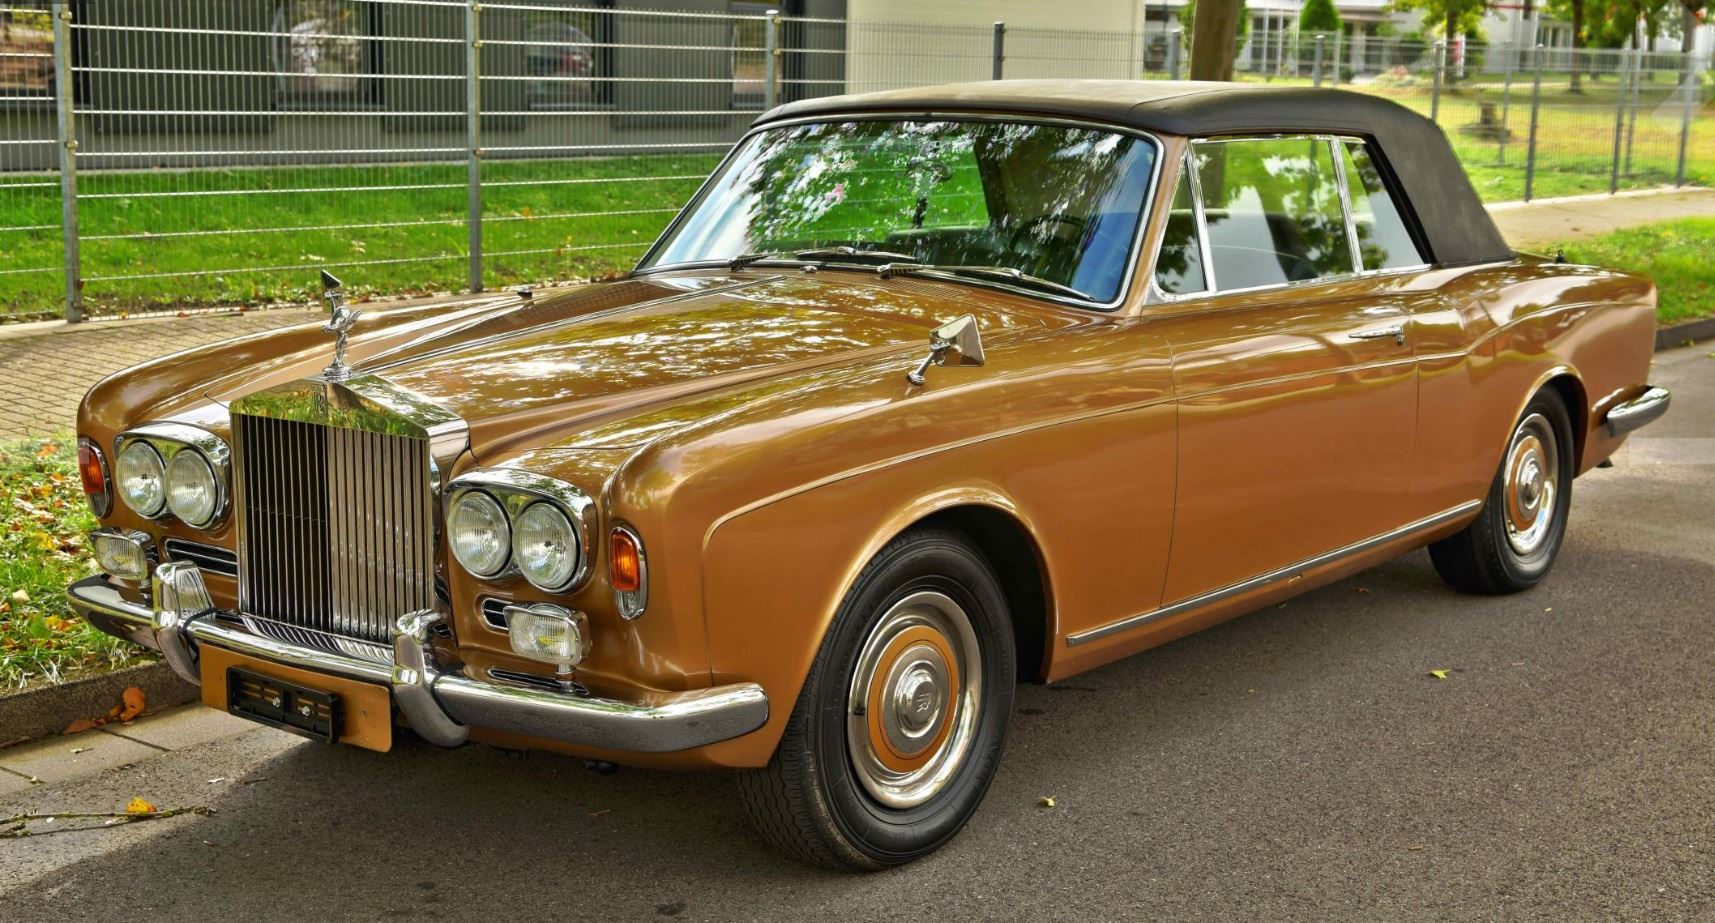 Sir Michael Caines first car  a RollsRoyce Silver Shadow  is up for  auction  Top Gear